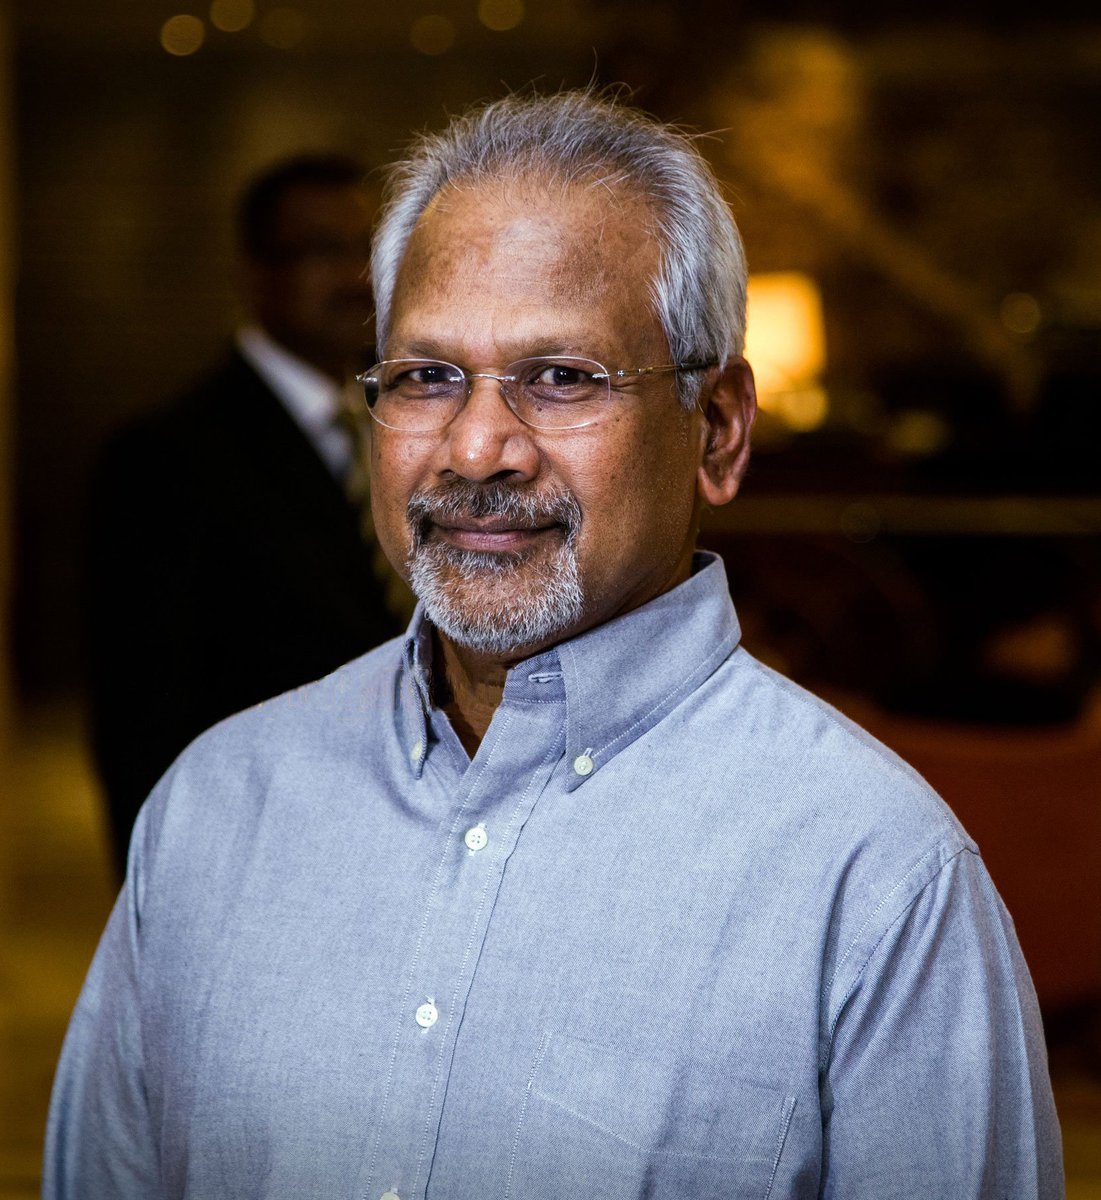 Happy Birthday, Mani Ratnam! 

From soulful melodies in Mouna Ragam to breathtaking visuals in Bombay, your films are pure magic. ✨ 

Here's to many more years of captivating audiences! 

#ManiRatnam #IndianCinema #Legend